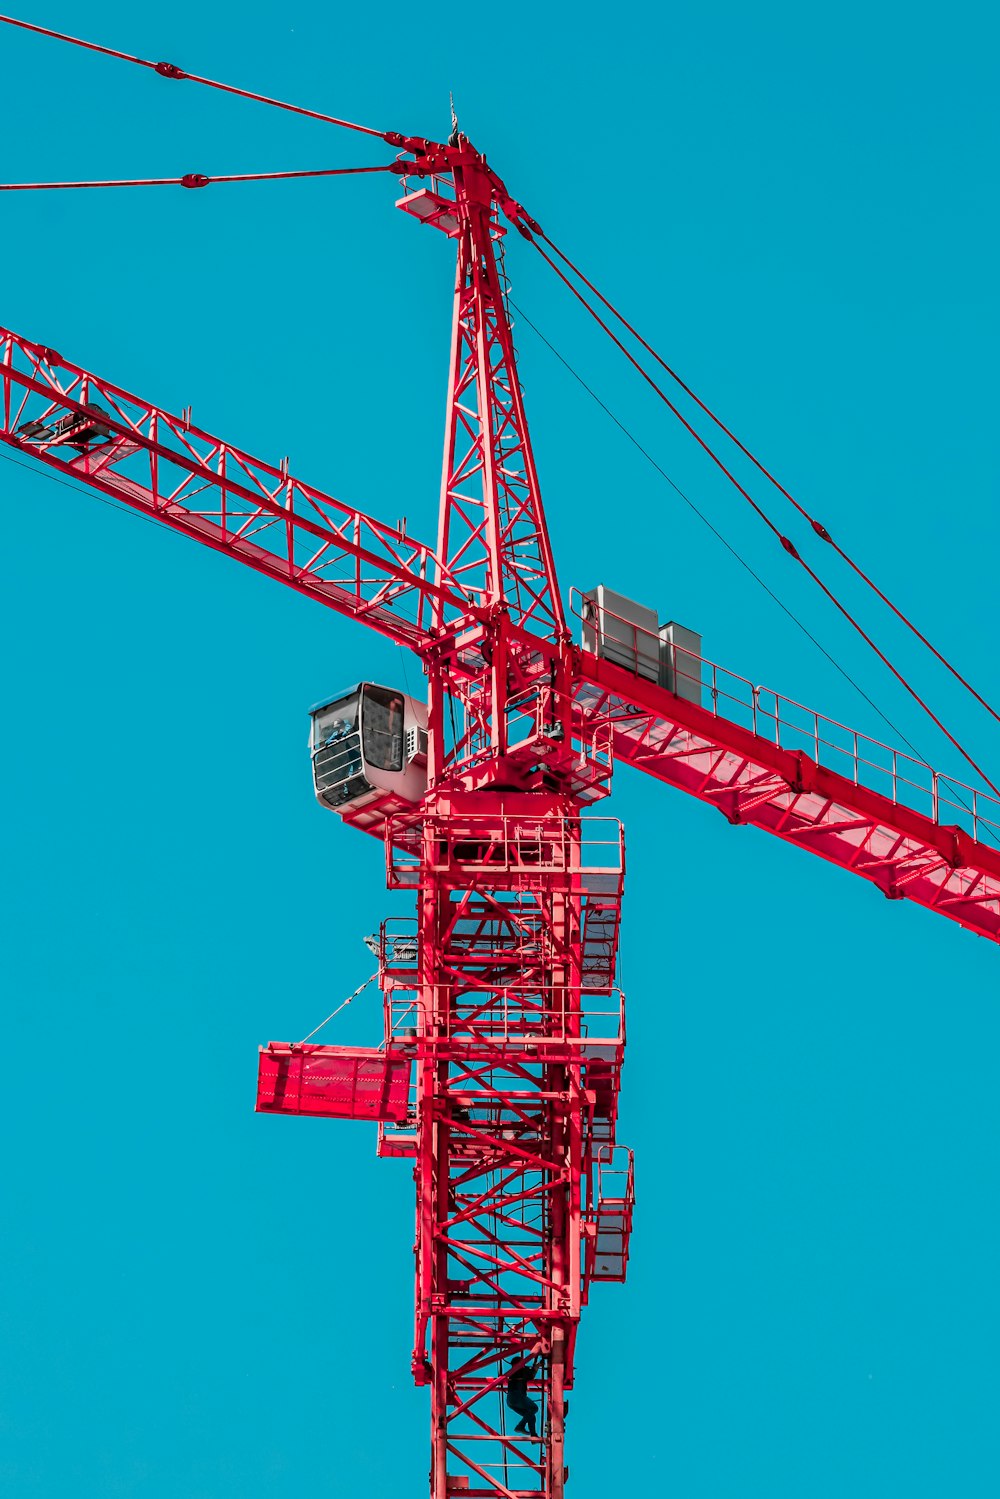 a large red crane is against a blue sky